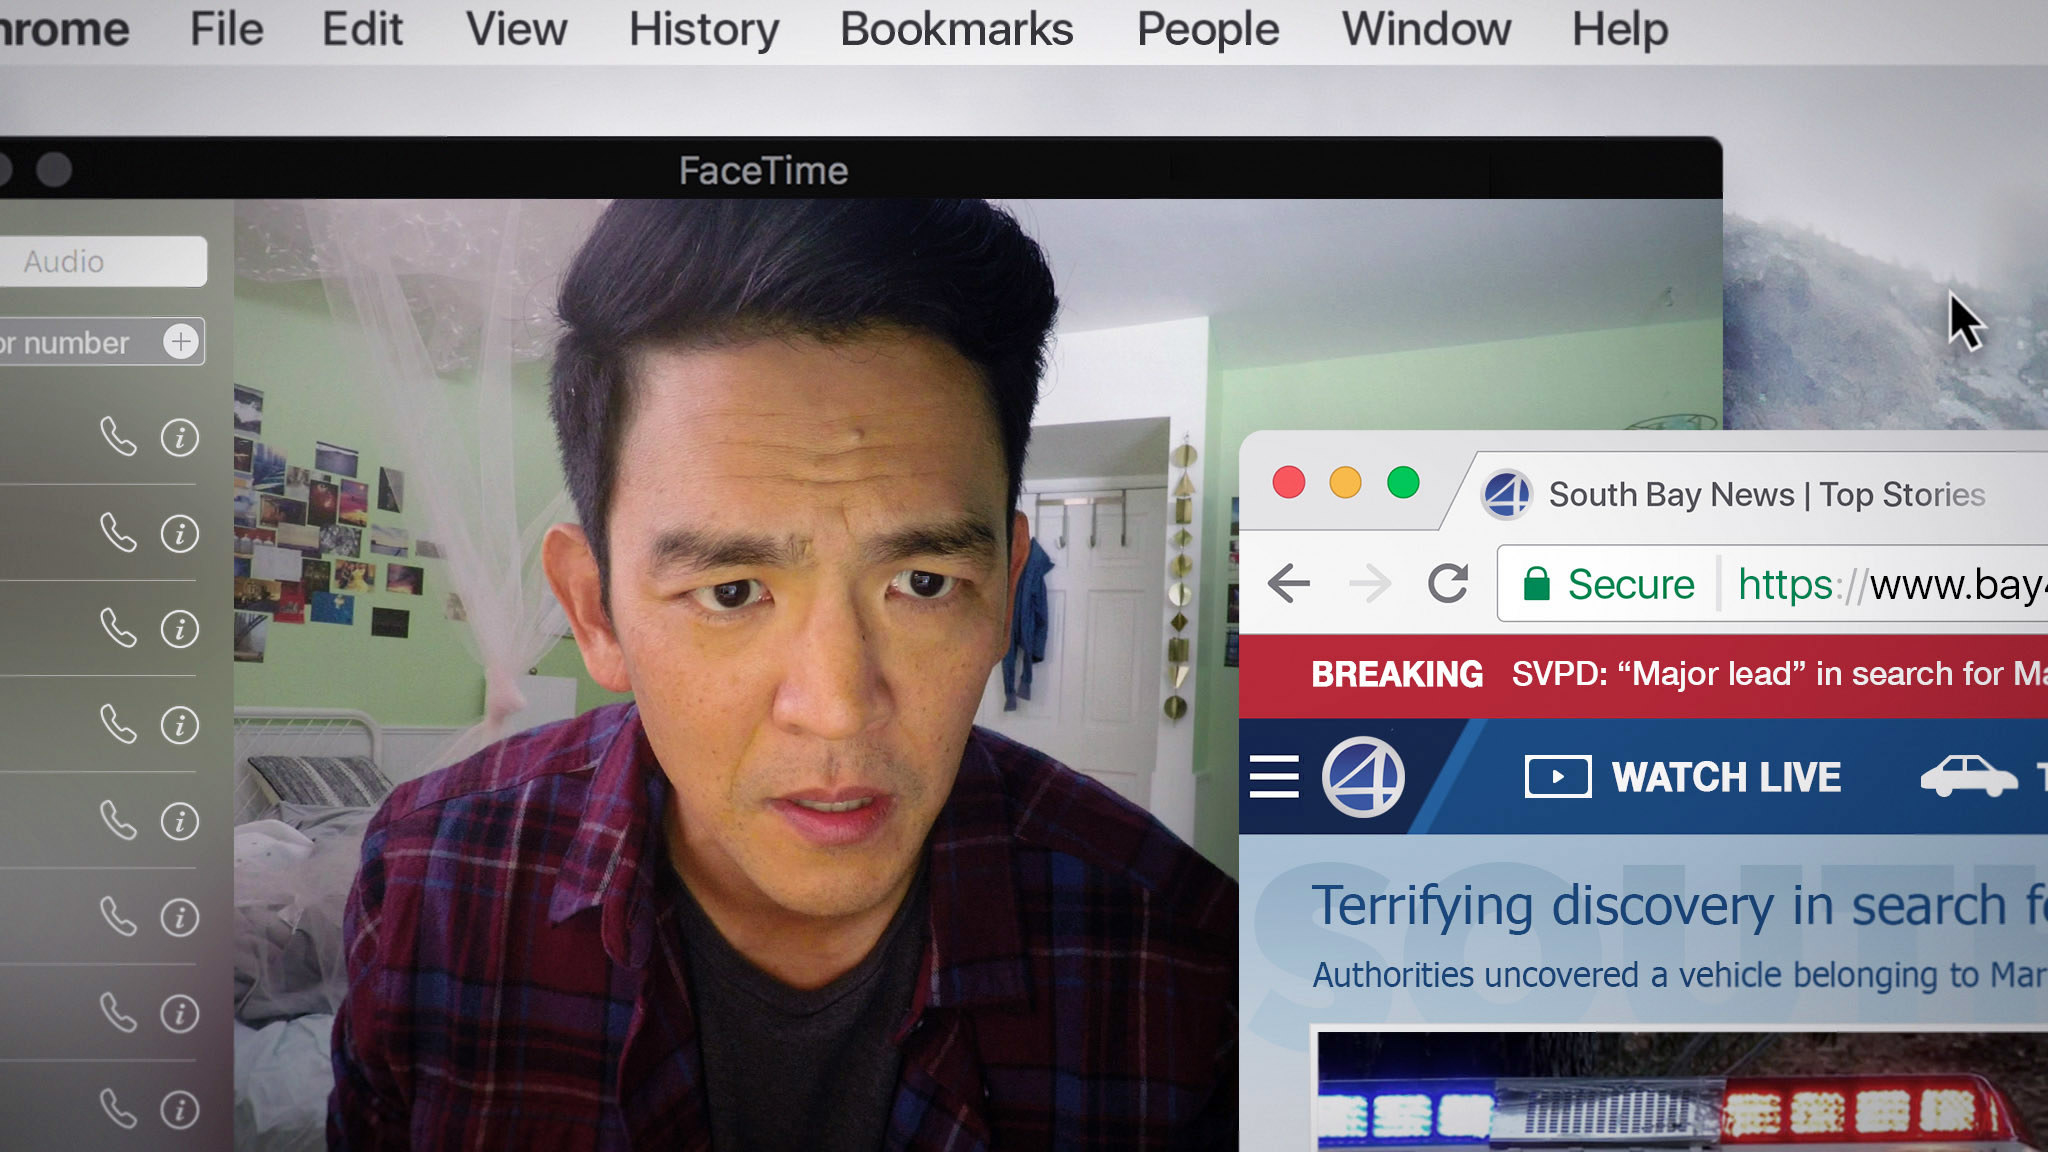 John Cho on a computer screen looking stressed out